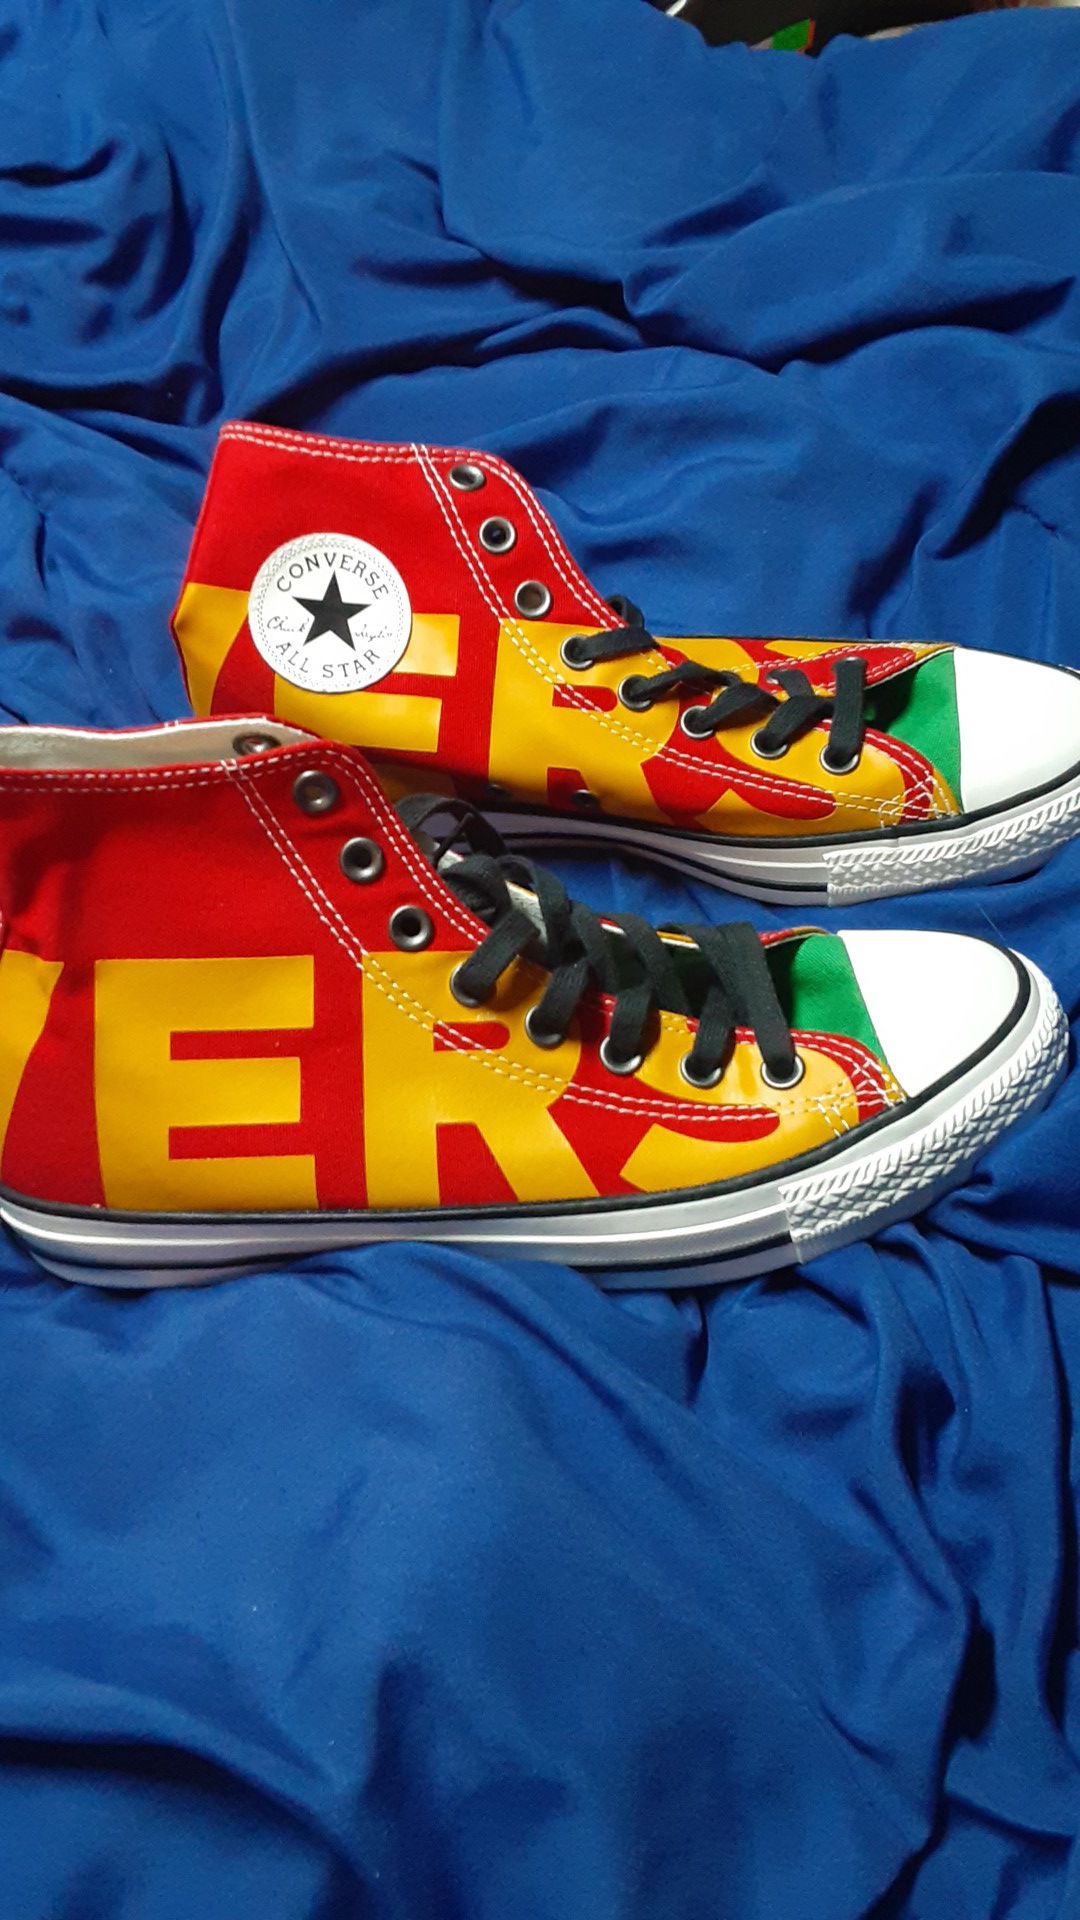 Converse Chuck Taylor All Star HI Wordmark enamel Red Green Yellow 159534F different sizes